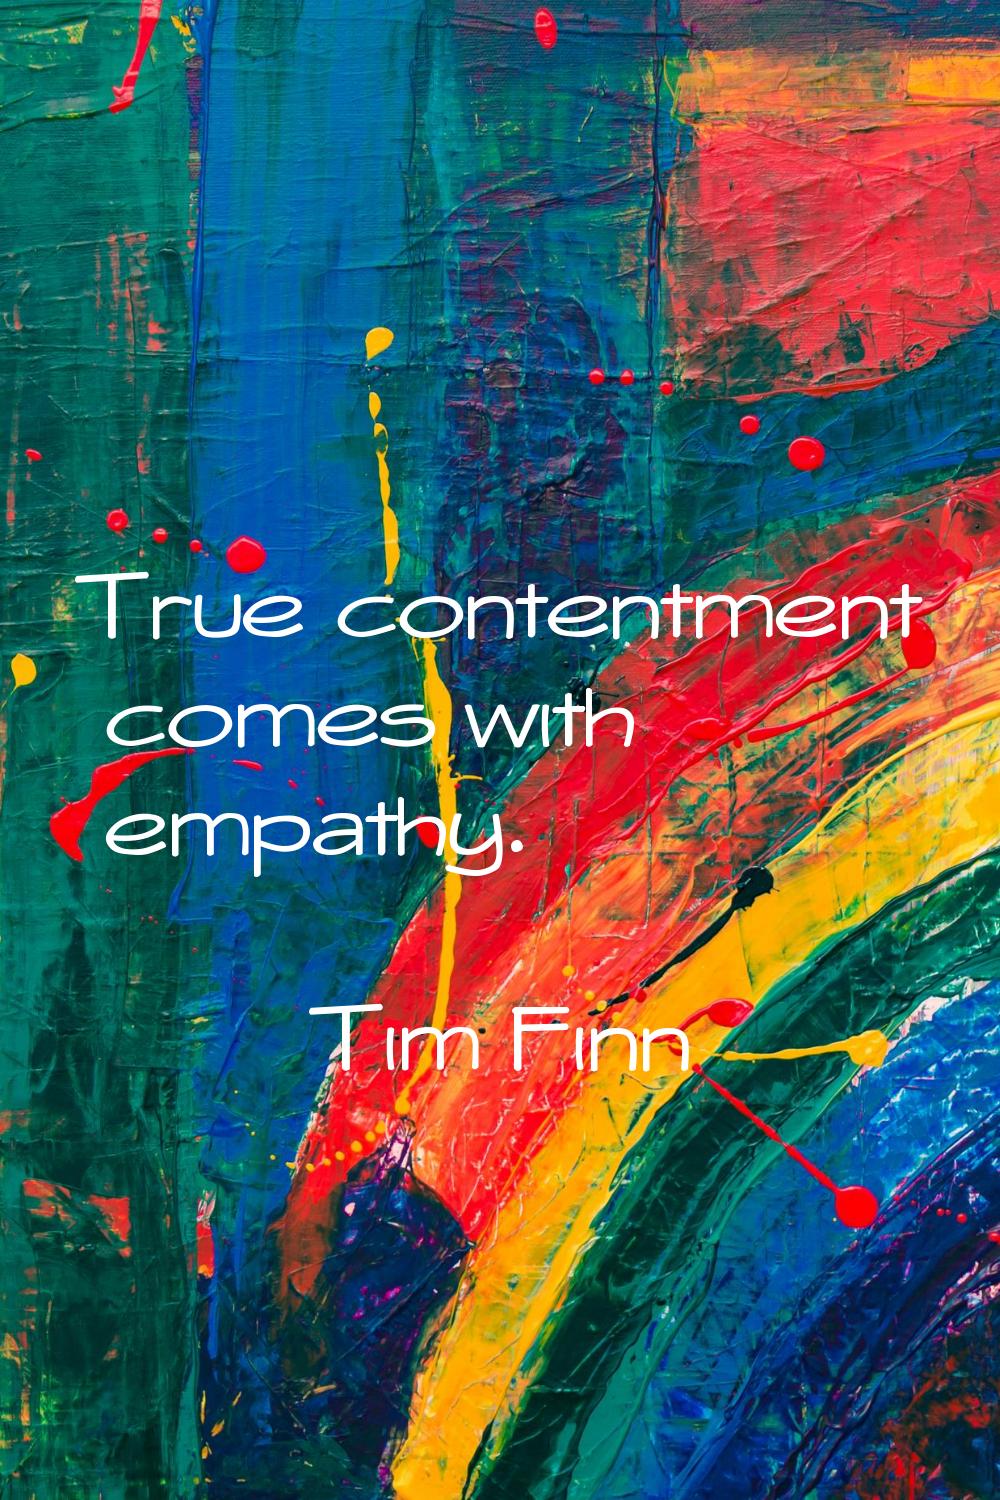 True contentment comes with empathy.